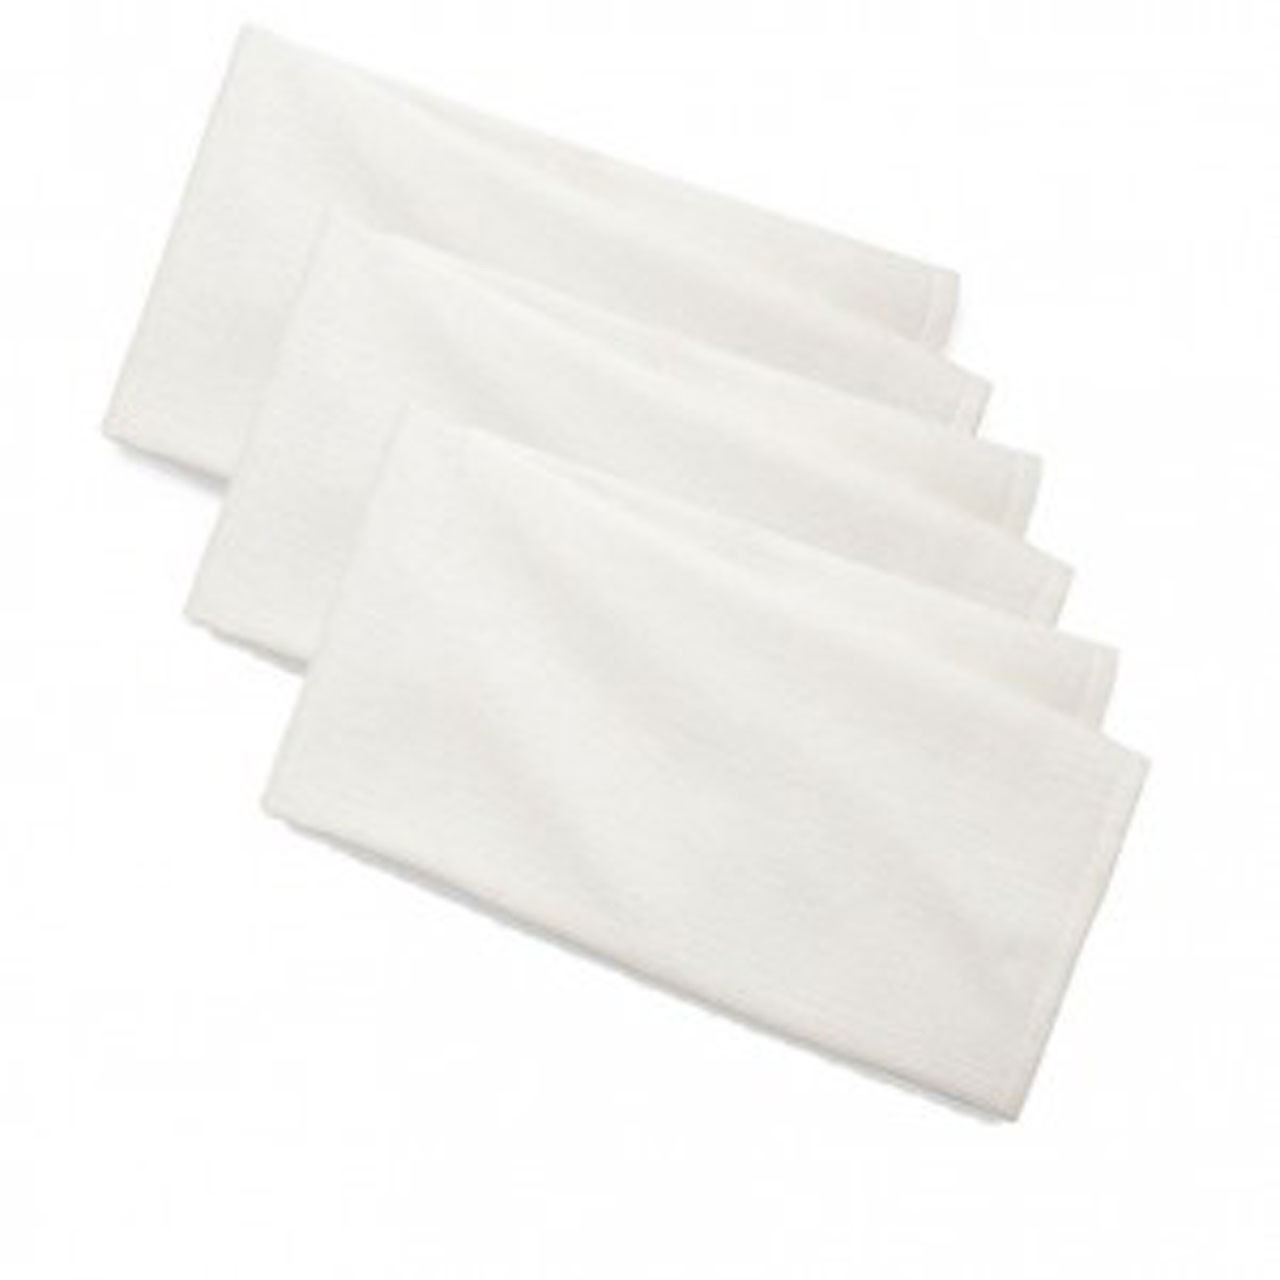 For which applications are huck towels the perfect choice?